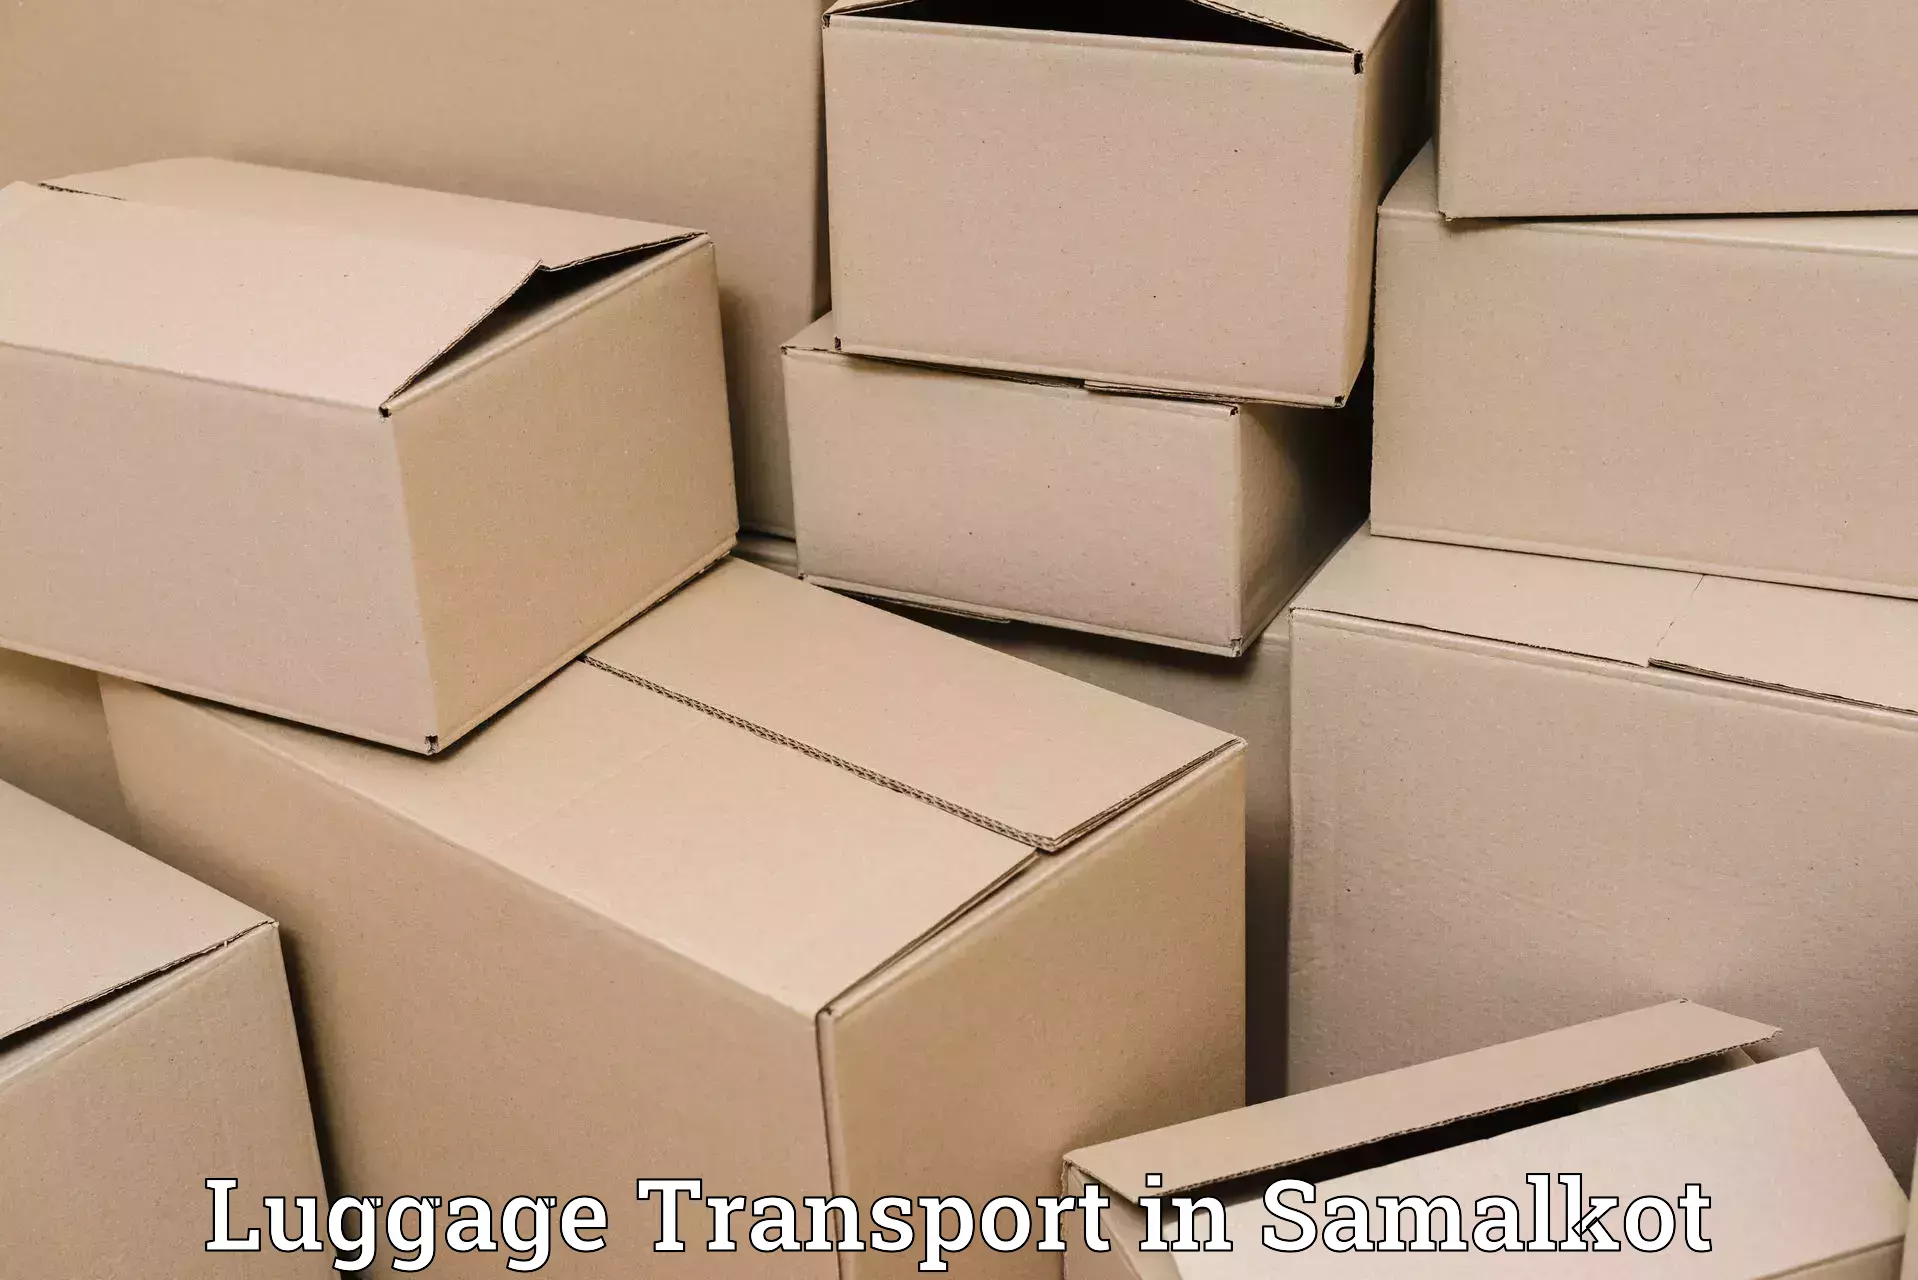 Luggage shipping trends in Samalkot